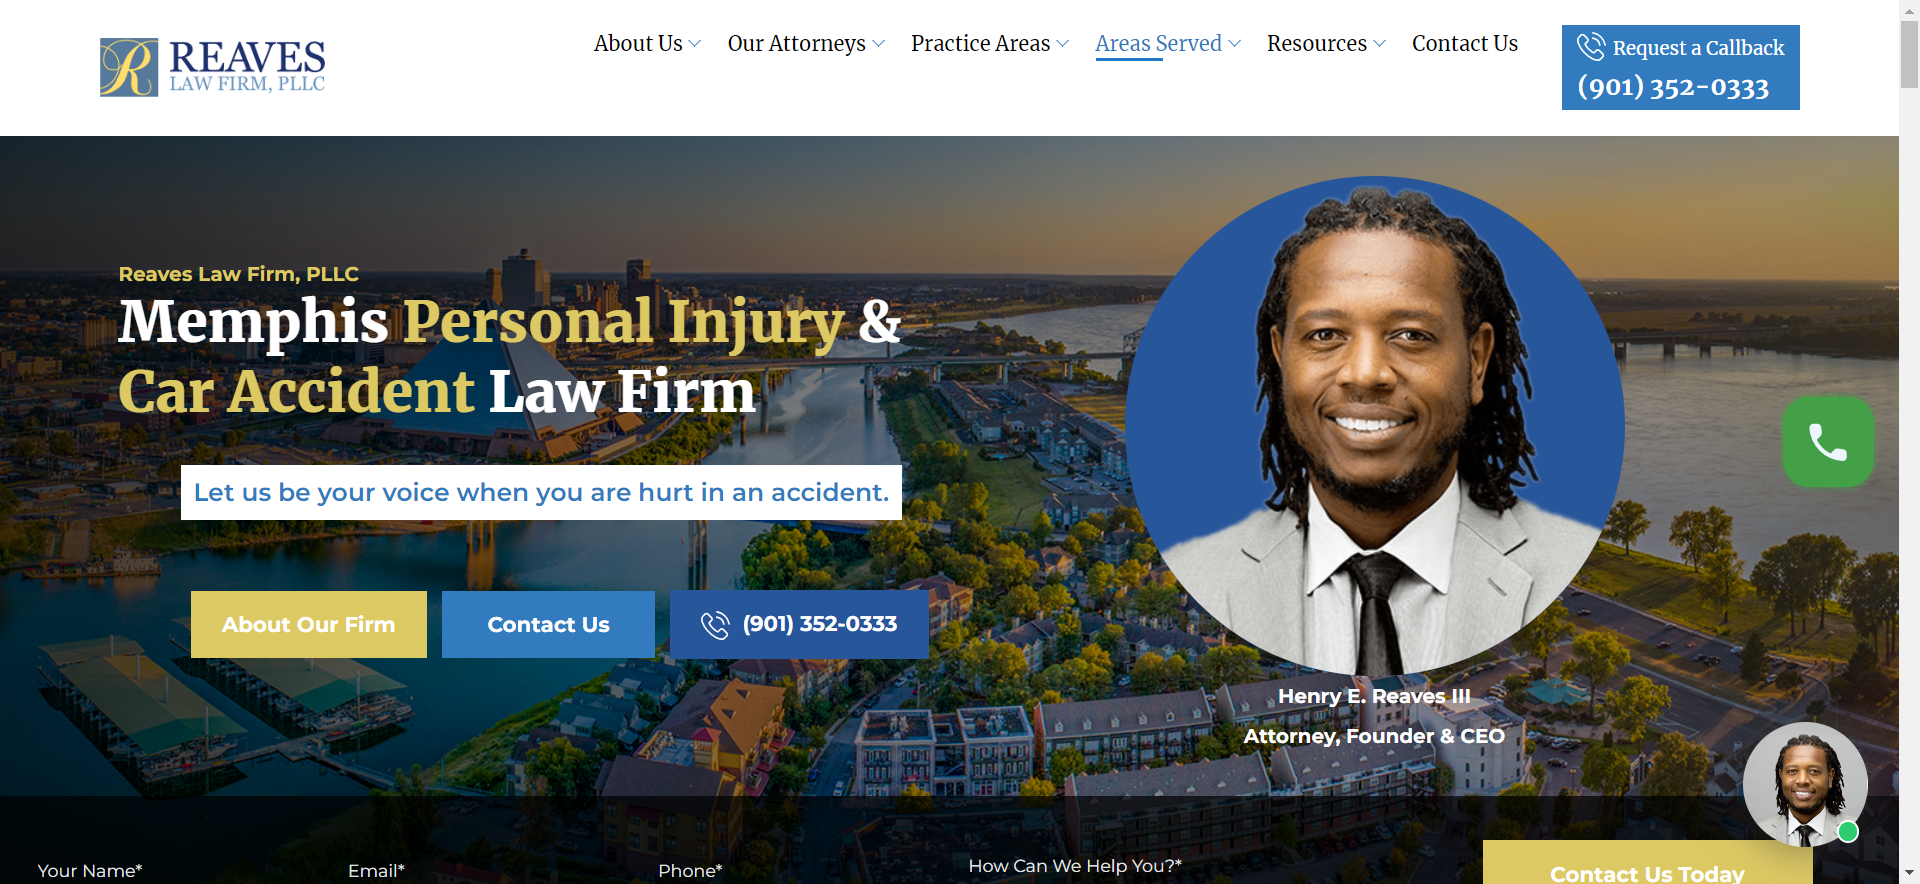 Best Personal Injury Lawyer In Memphis Found At Beyourvoice.Com